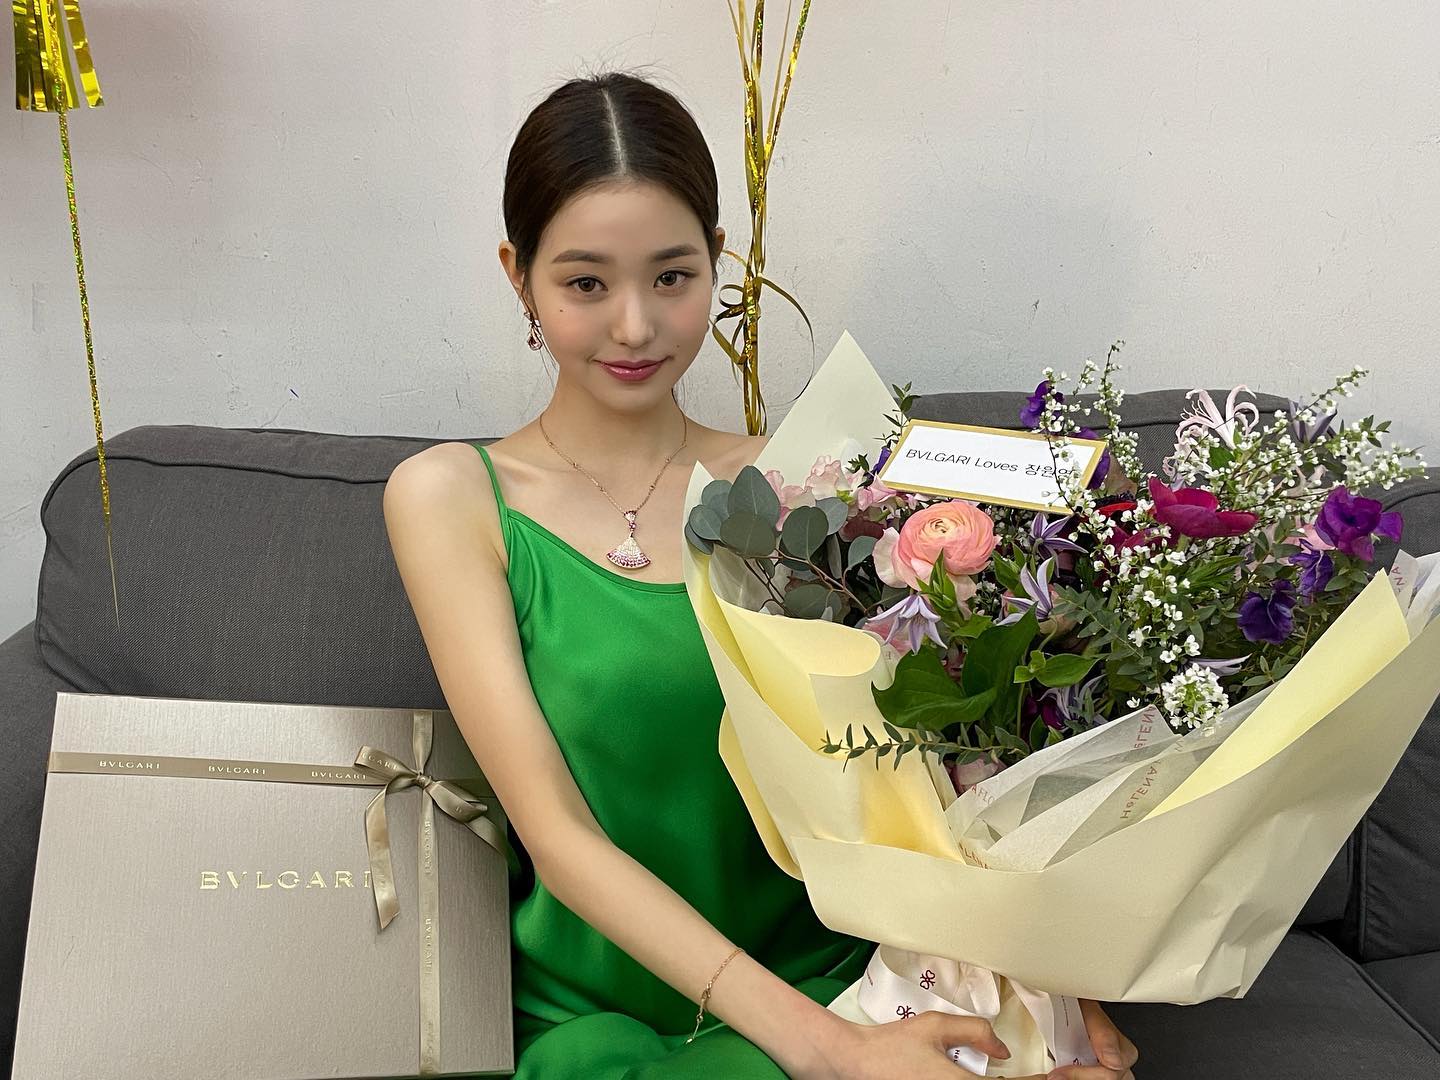 What institution did Jang Won-young attend school at